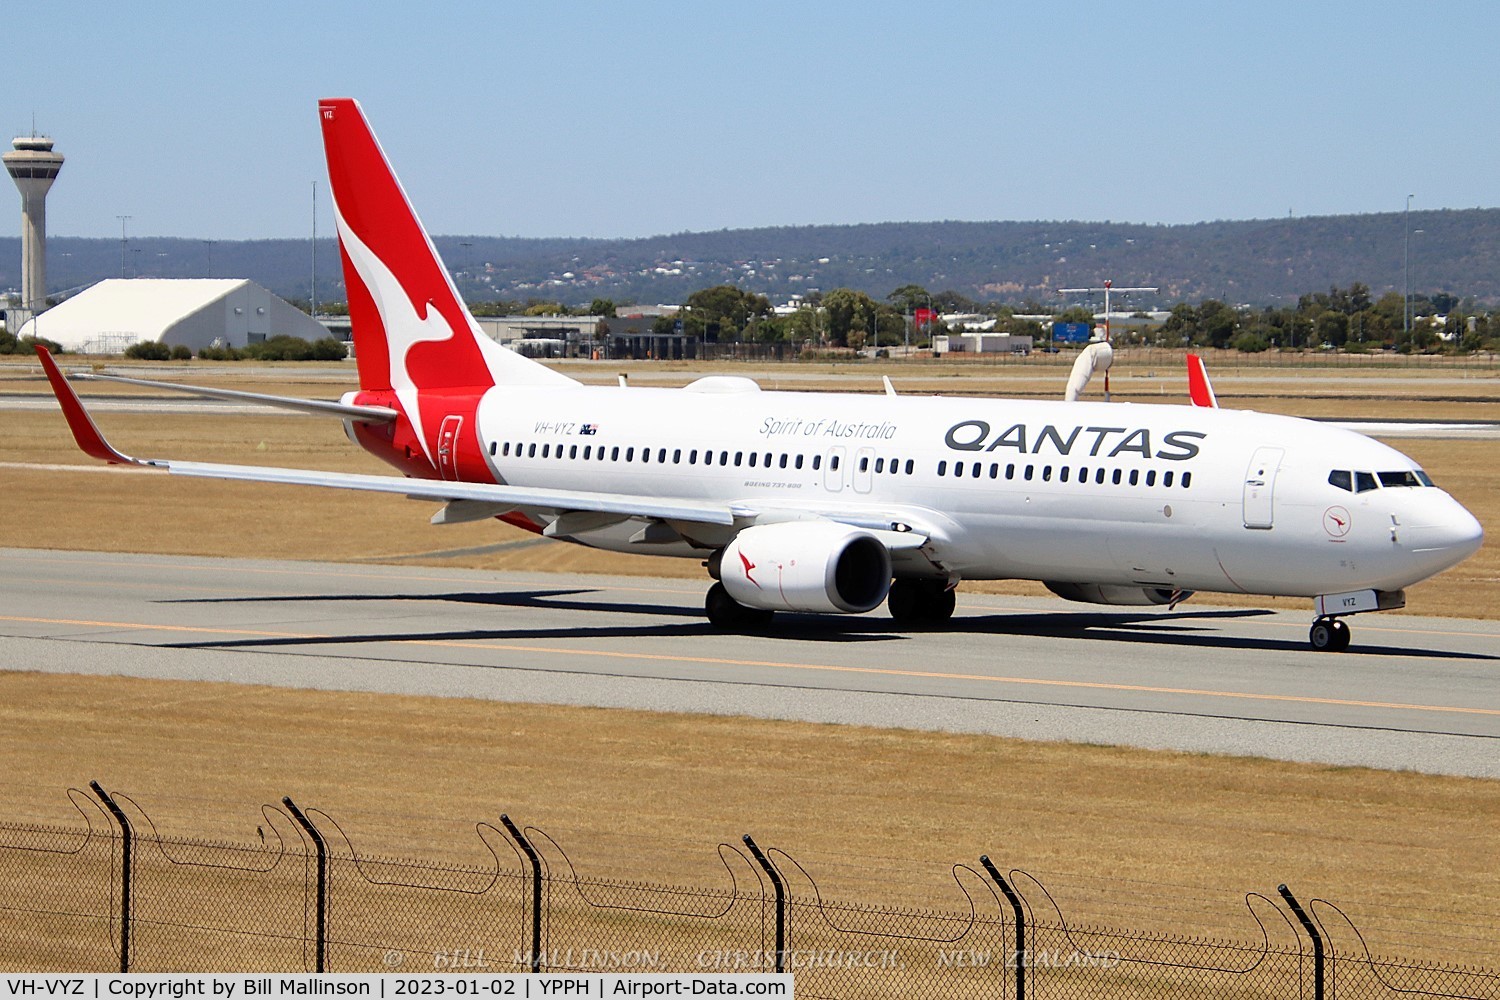 VH-VYZ, 2011 Boeing 737-838 C/N 34190, as QF560 to SYD